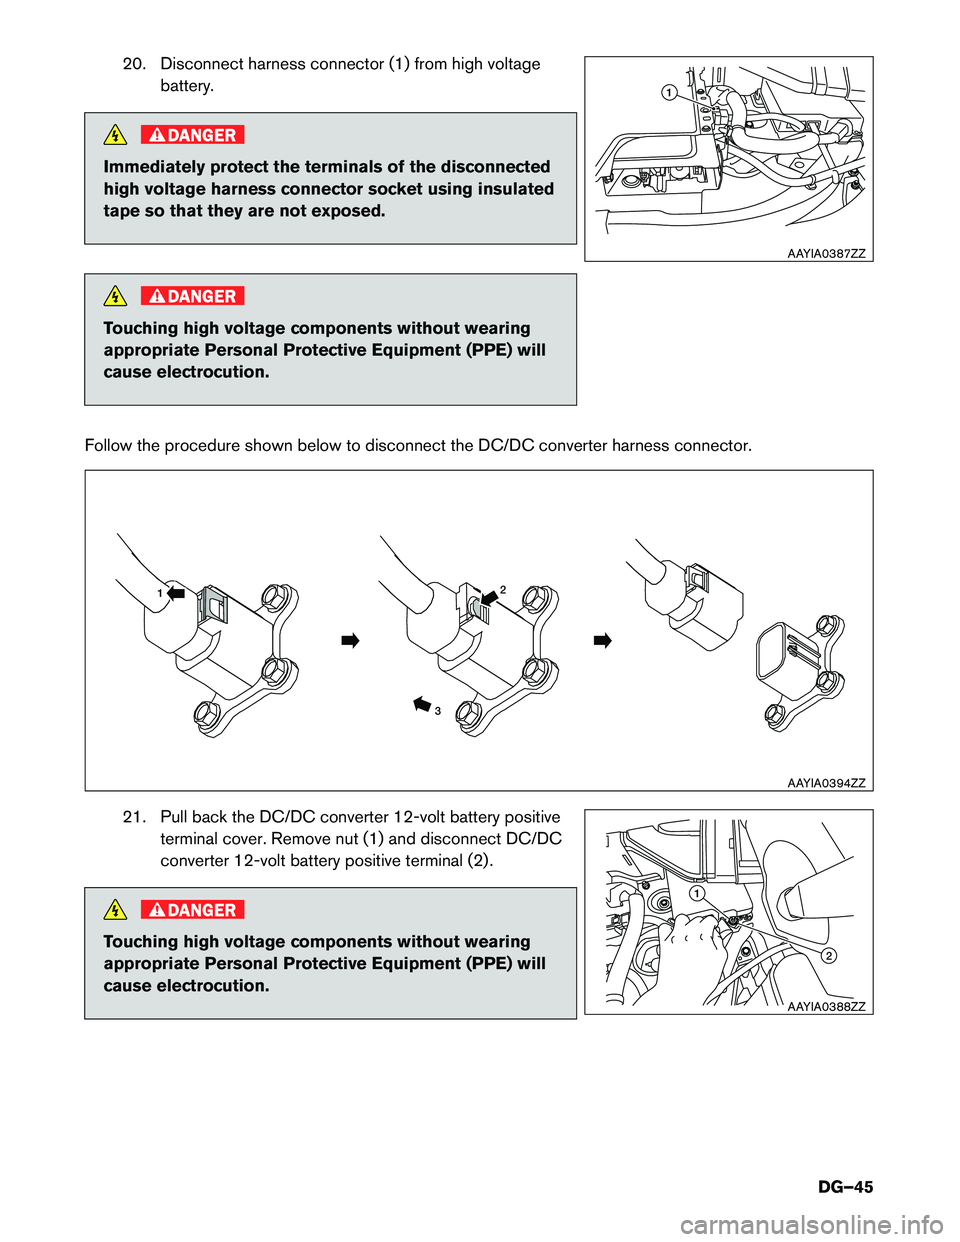 INFINITI QX60 HYBRID 2015  Dismantling Guide 20. Disconnect harness connector (1) from high voltagebattery.
DANGER
Immediately protect the terminals of the disconnected 
high voltage harness connector socket using insulated
tape so that they are